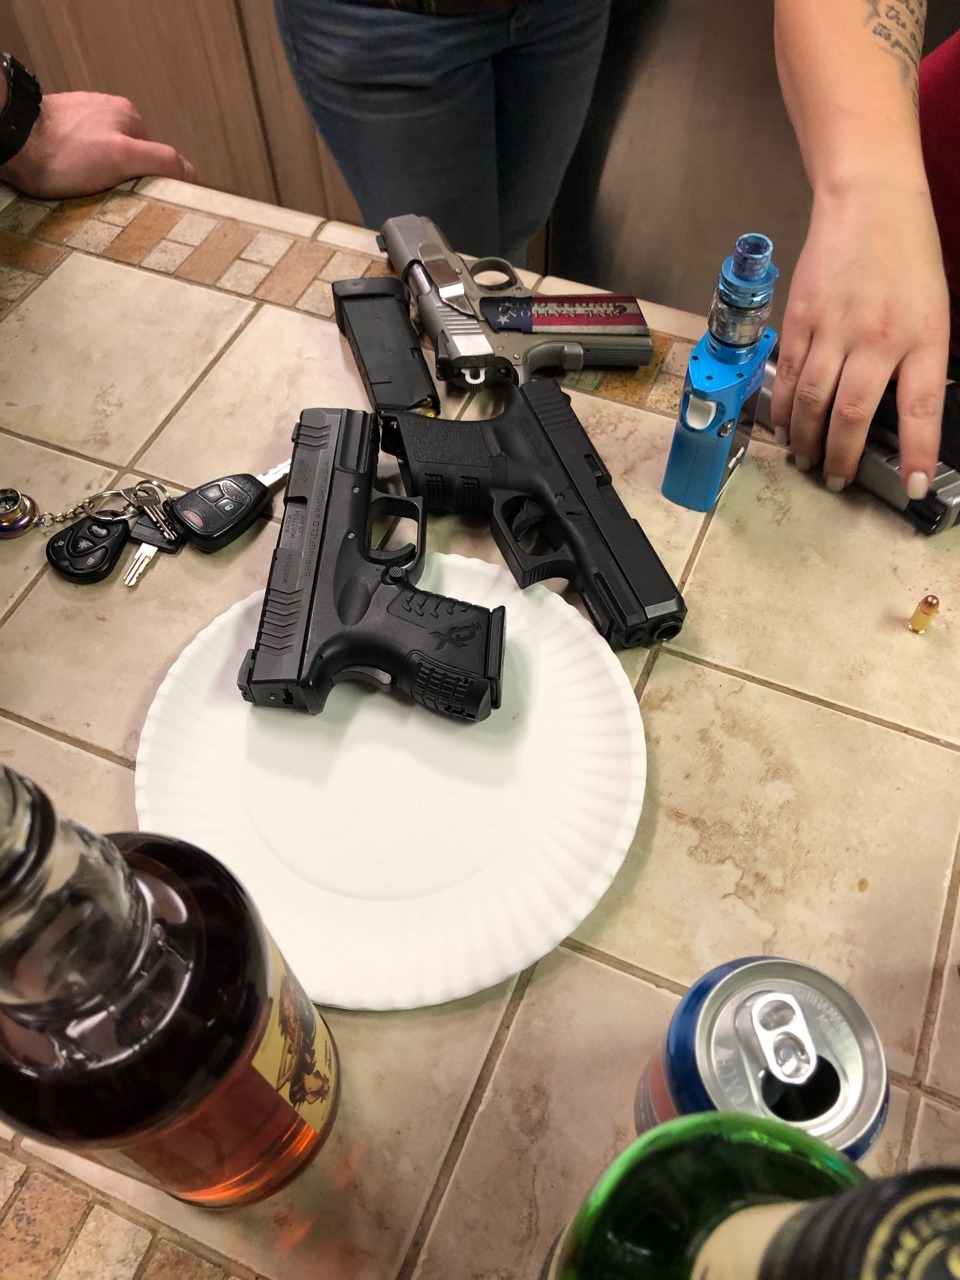 New Years so far, hope everyone is having a great night . ( side note : yes we have guns and alchohol, no we aren’t being dumb 😊)